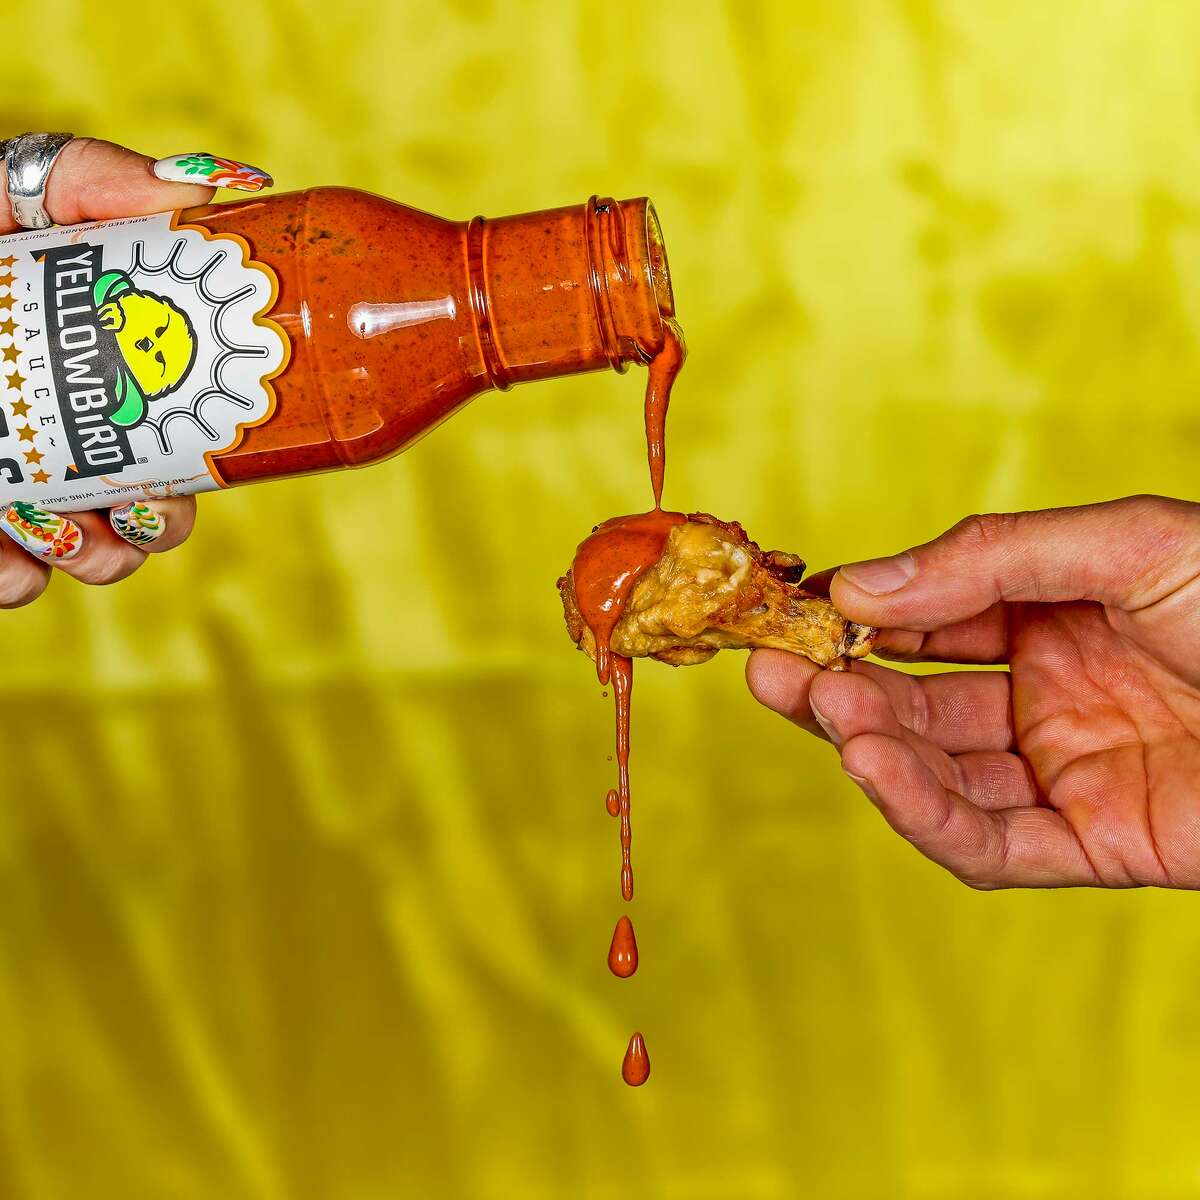 Yellowbird recently unveiled a limited-edition sauce called Bliss & Vinegar, made for Hot Ones Season 16.